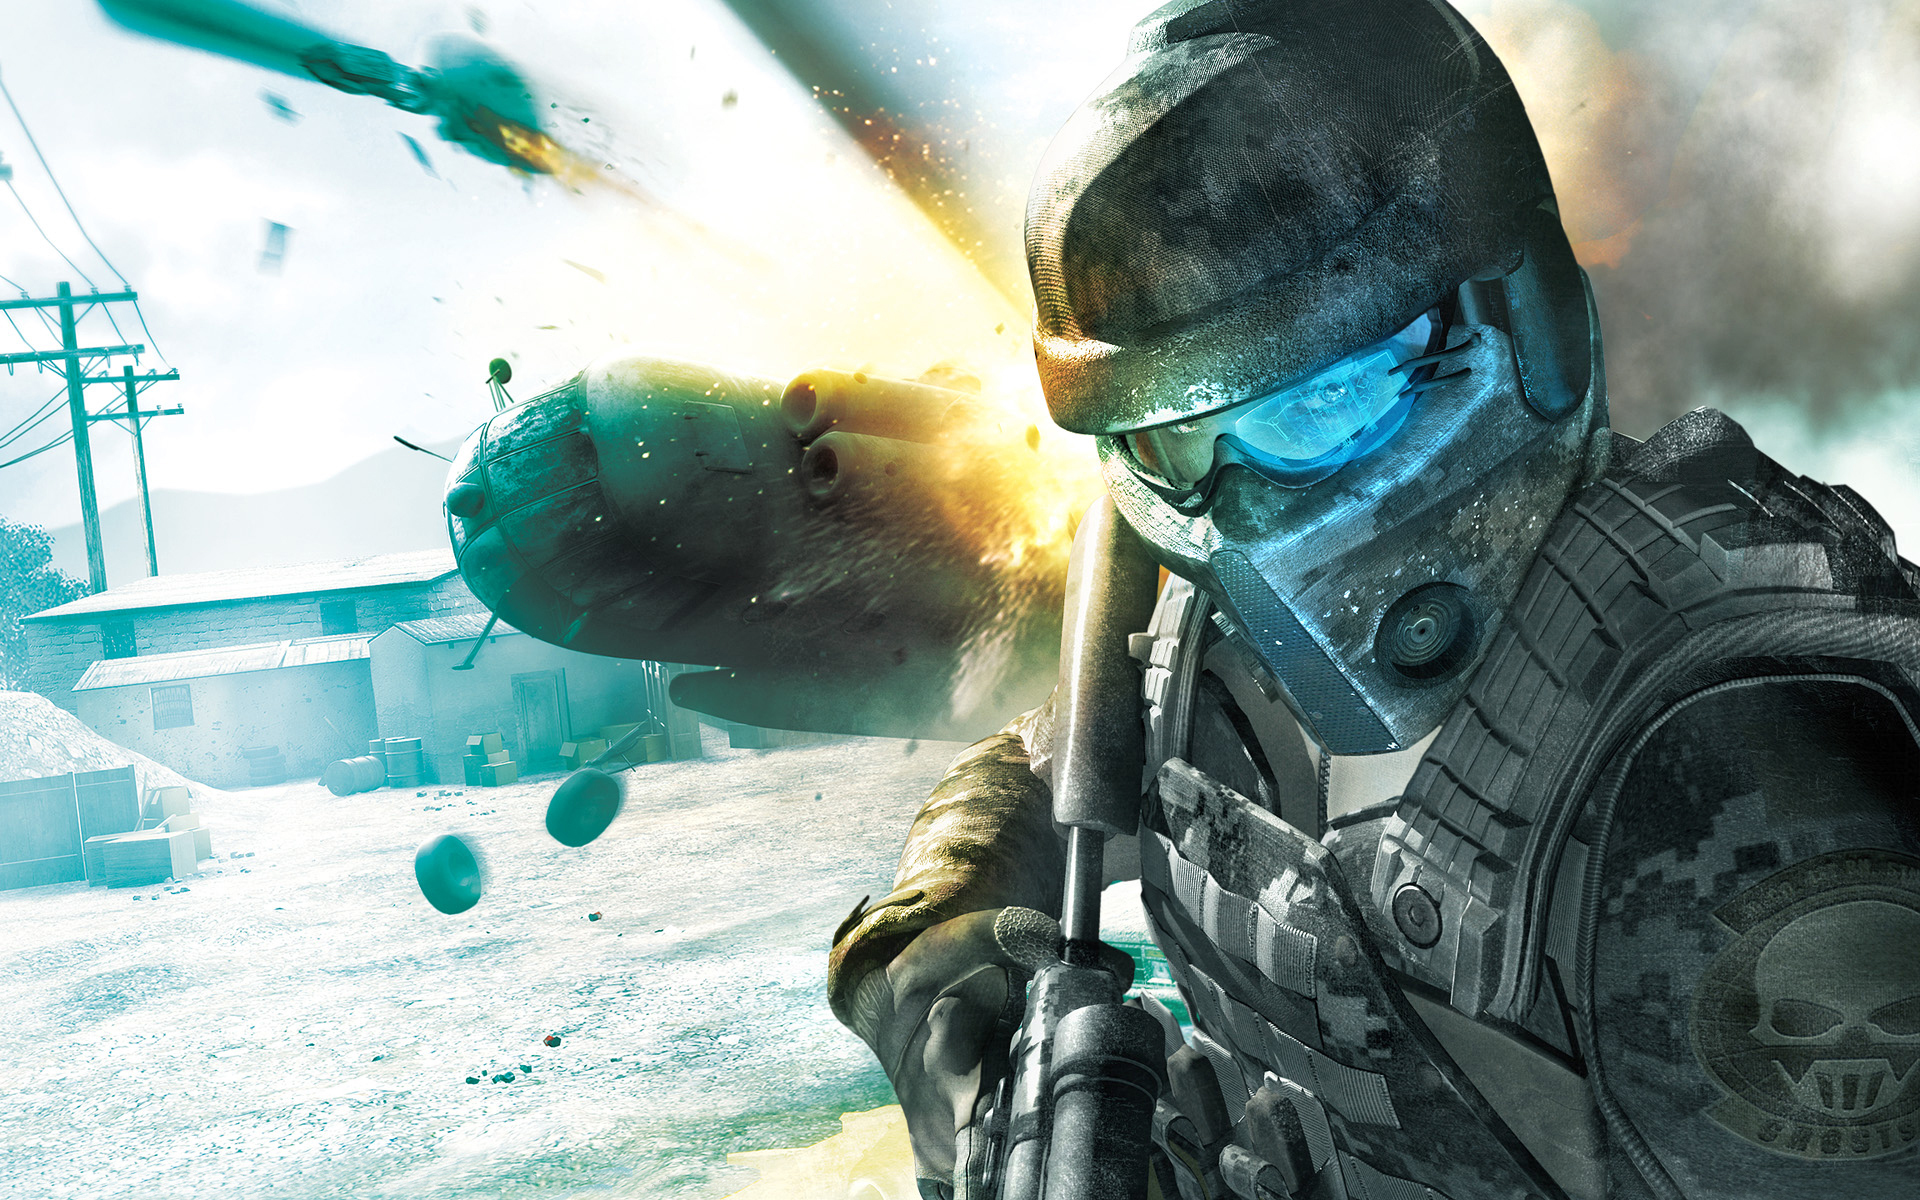 video game, tom clancy's ghost recon: future soldier